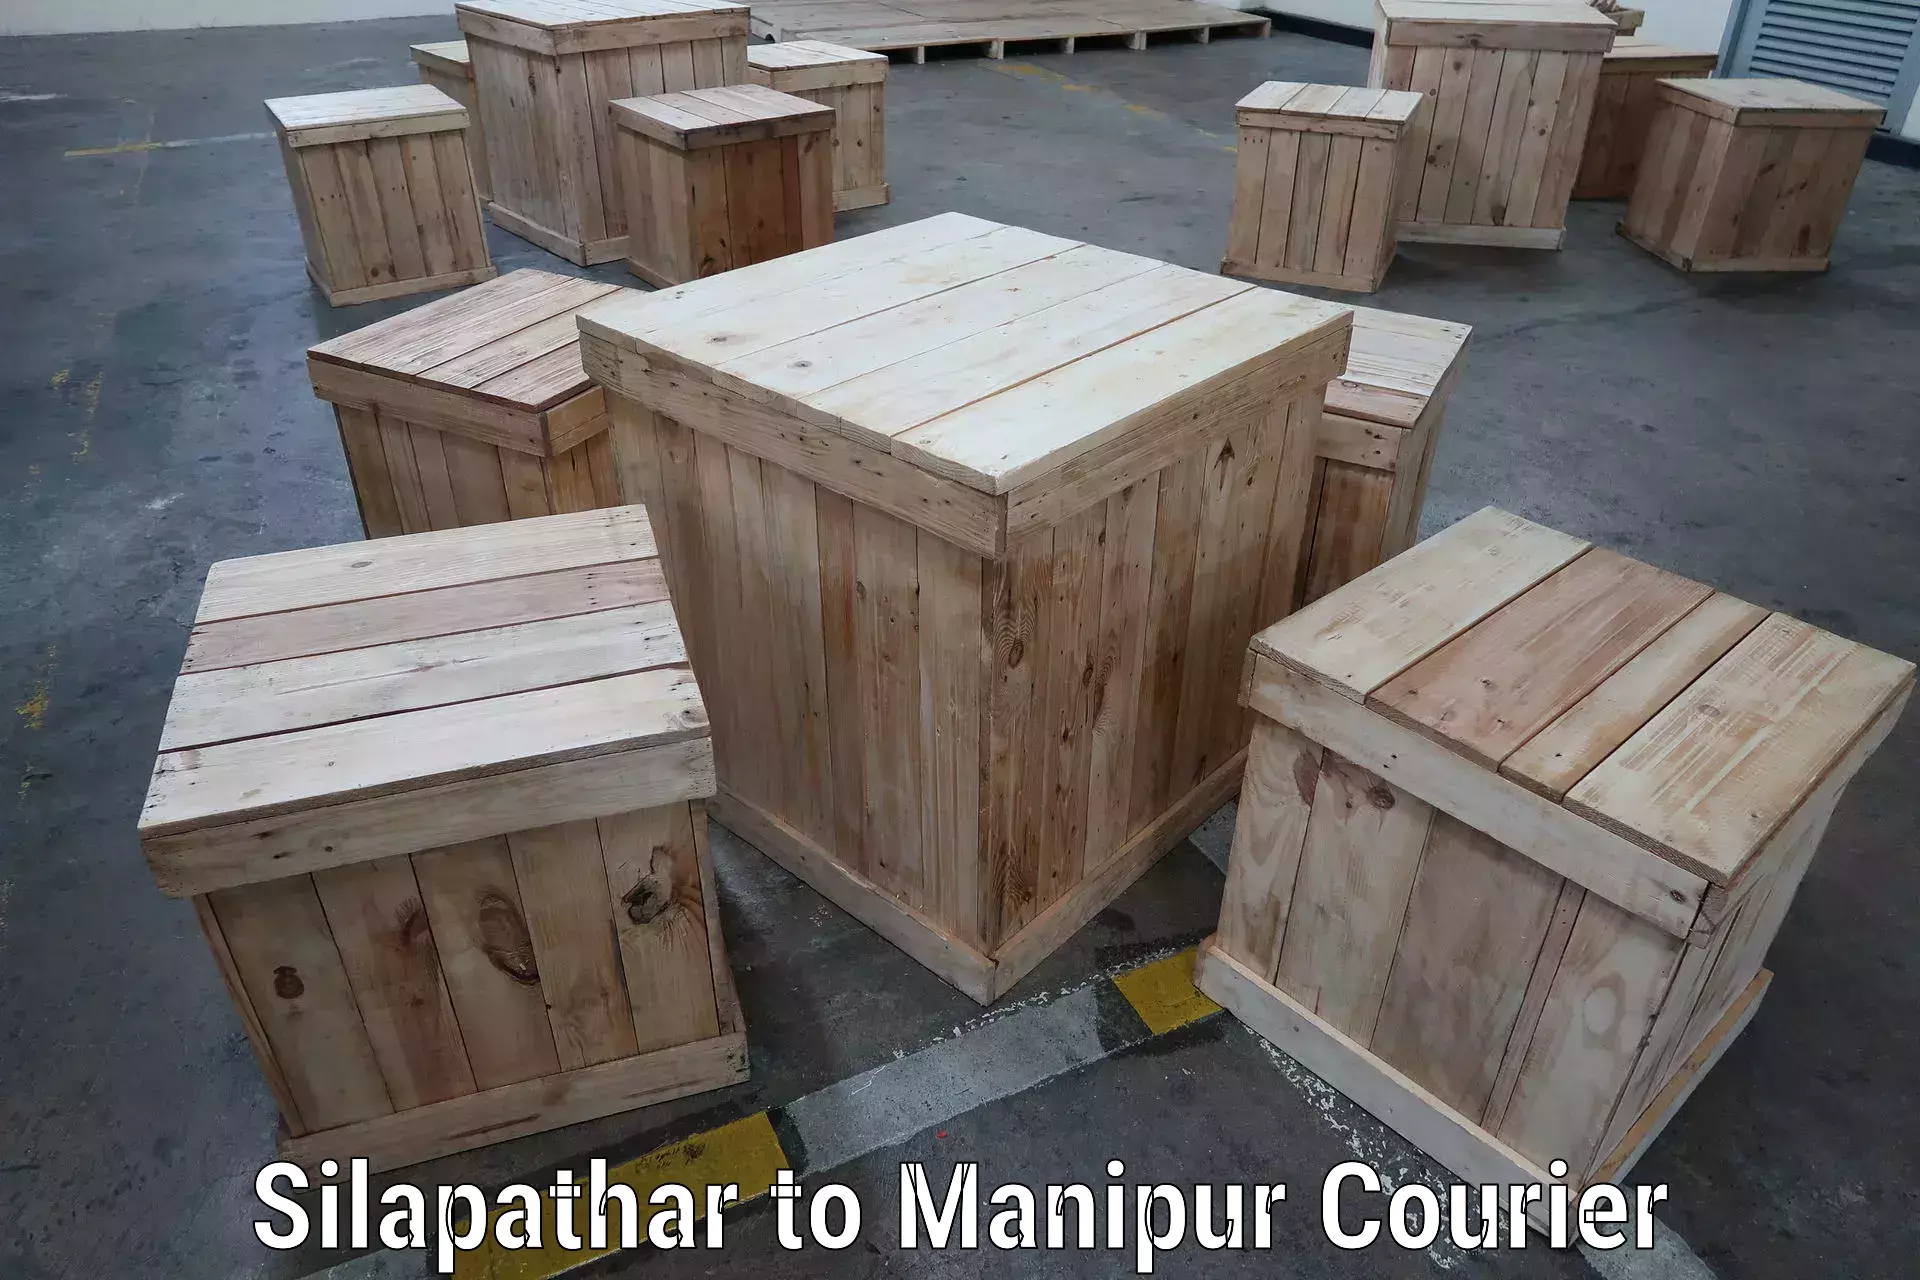 Logistics and distribution Silapathar to Manipur